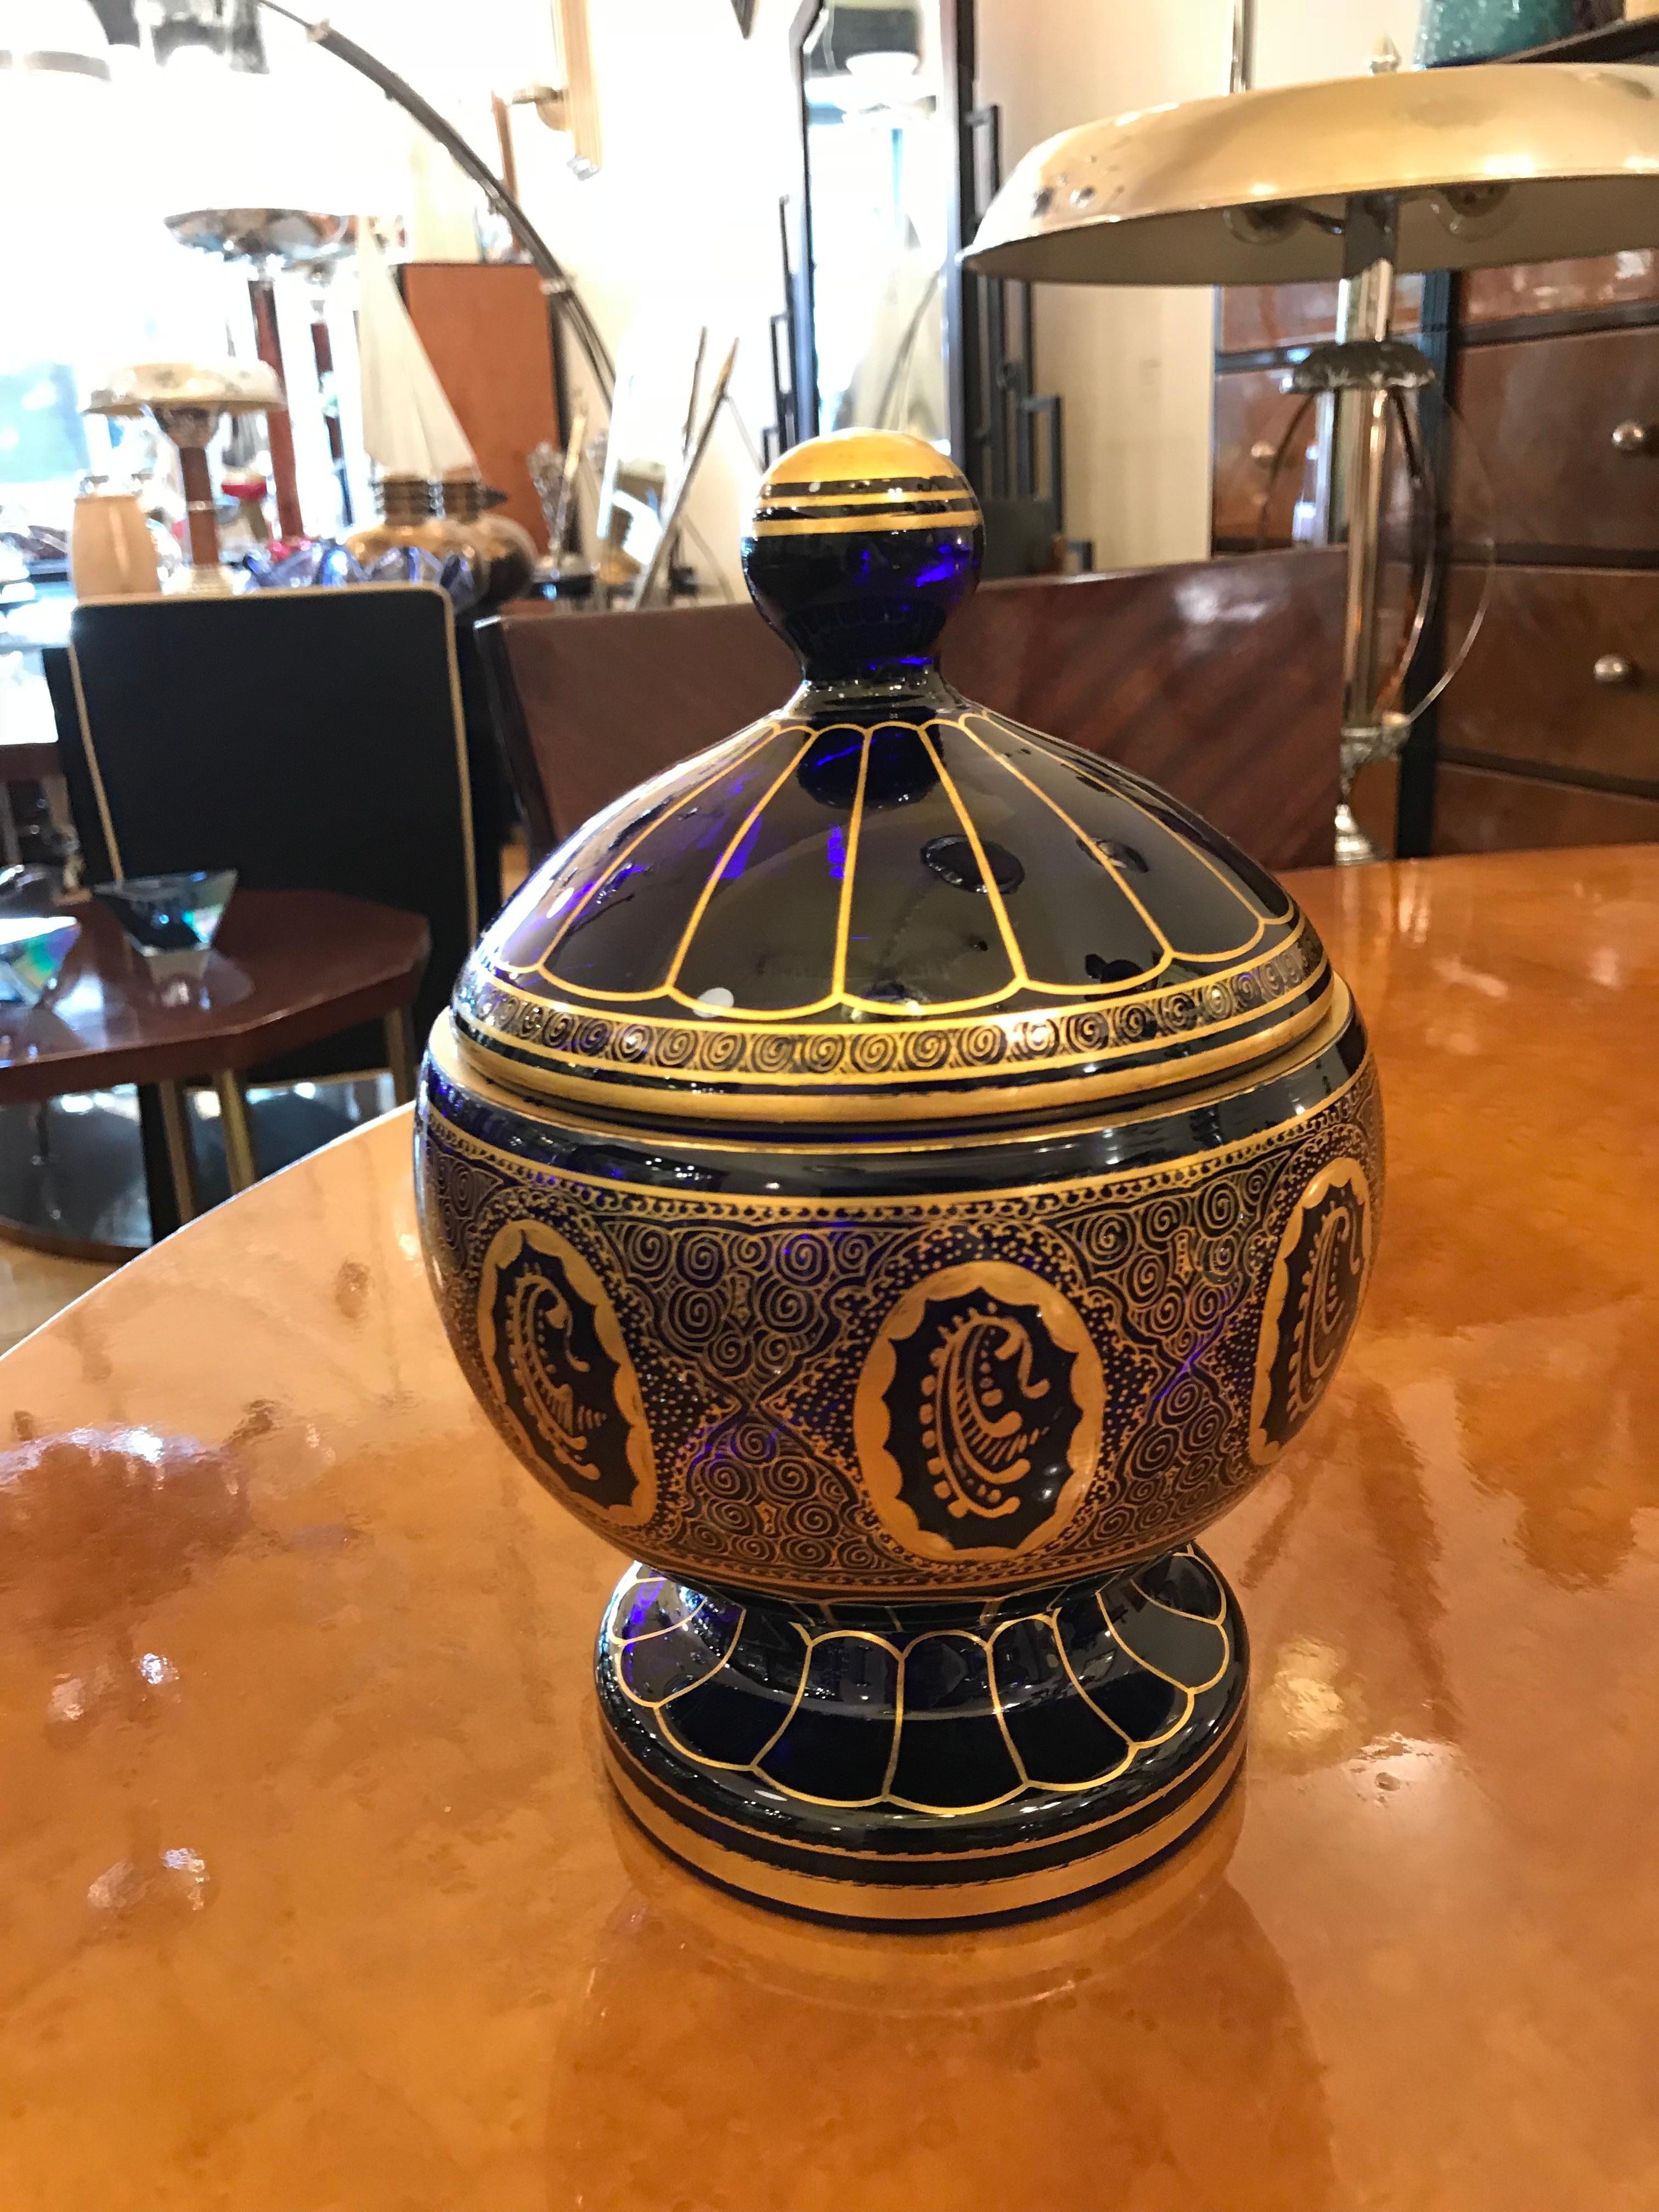 Style: Vienna Secession
If you have any questions we are at your disposal.
We have specialized in the sale of Art Deco and Art Nouveau styles since 1982.If you have any questions we are at your disposal.
Pushing the button that reads 'View All From